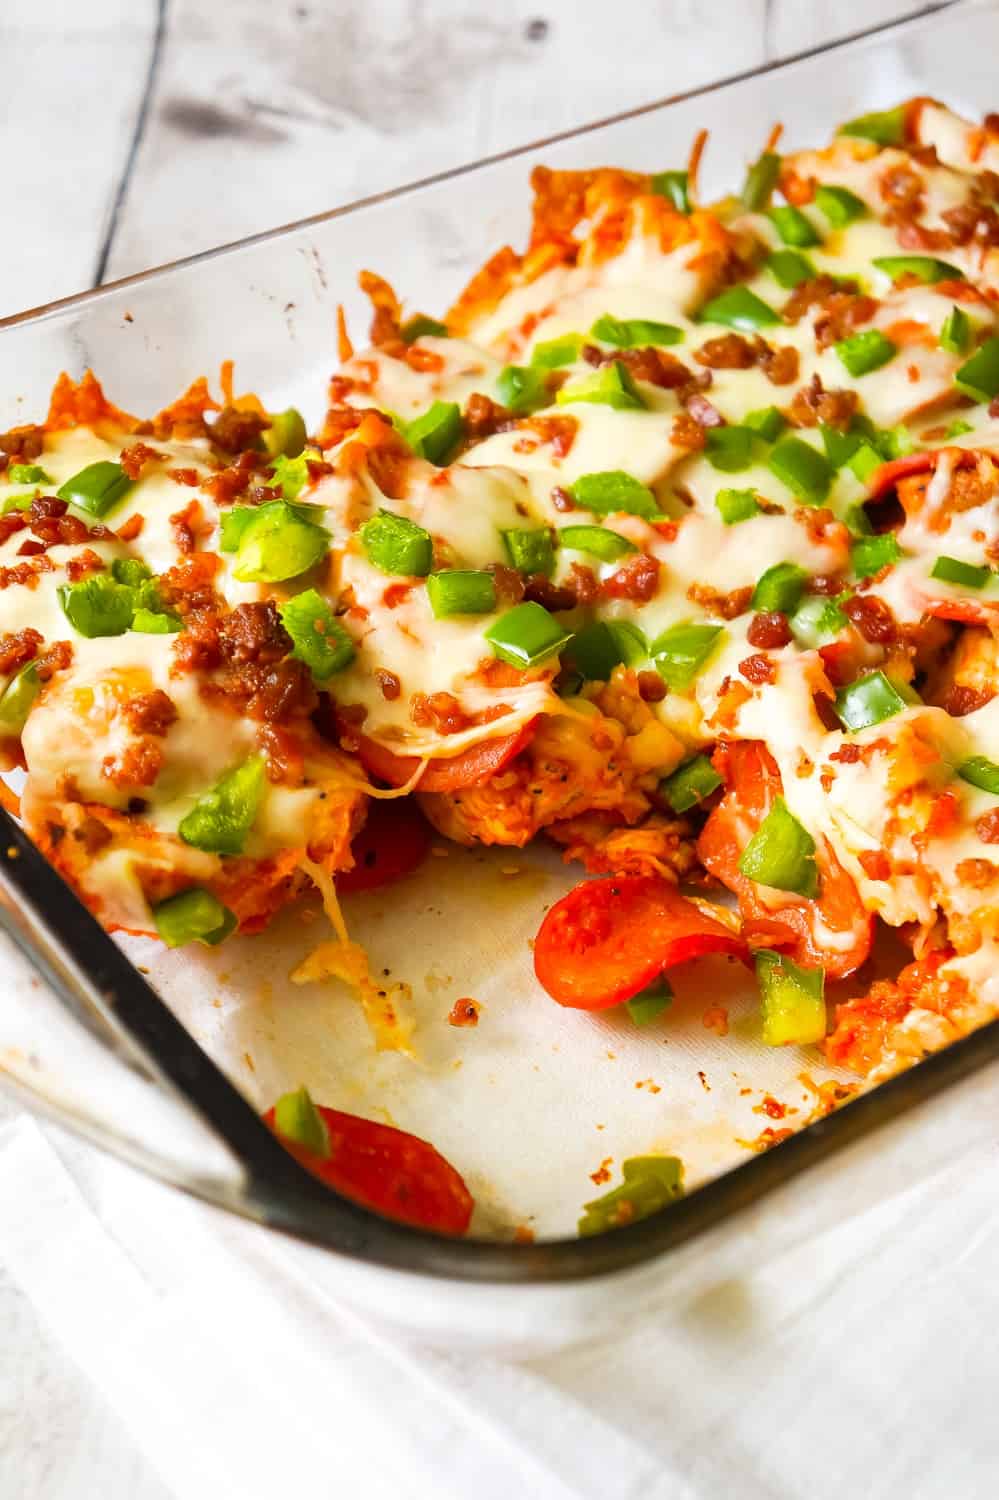 Pizza Bagel Casserole is an easy dinner recipe the whole family will love.This everything bagel casserole is loaded with pepperoni, pizza sauce, green peppers, bacon and cheese.